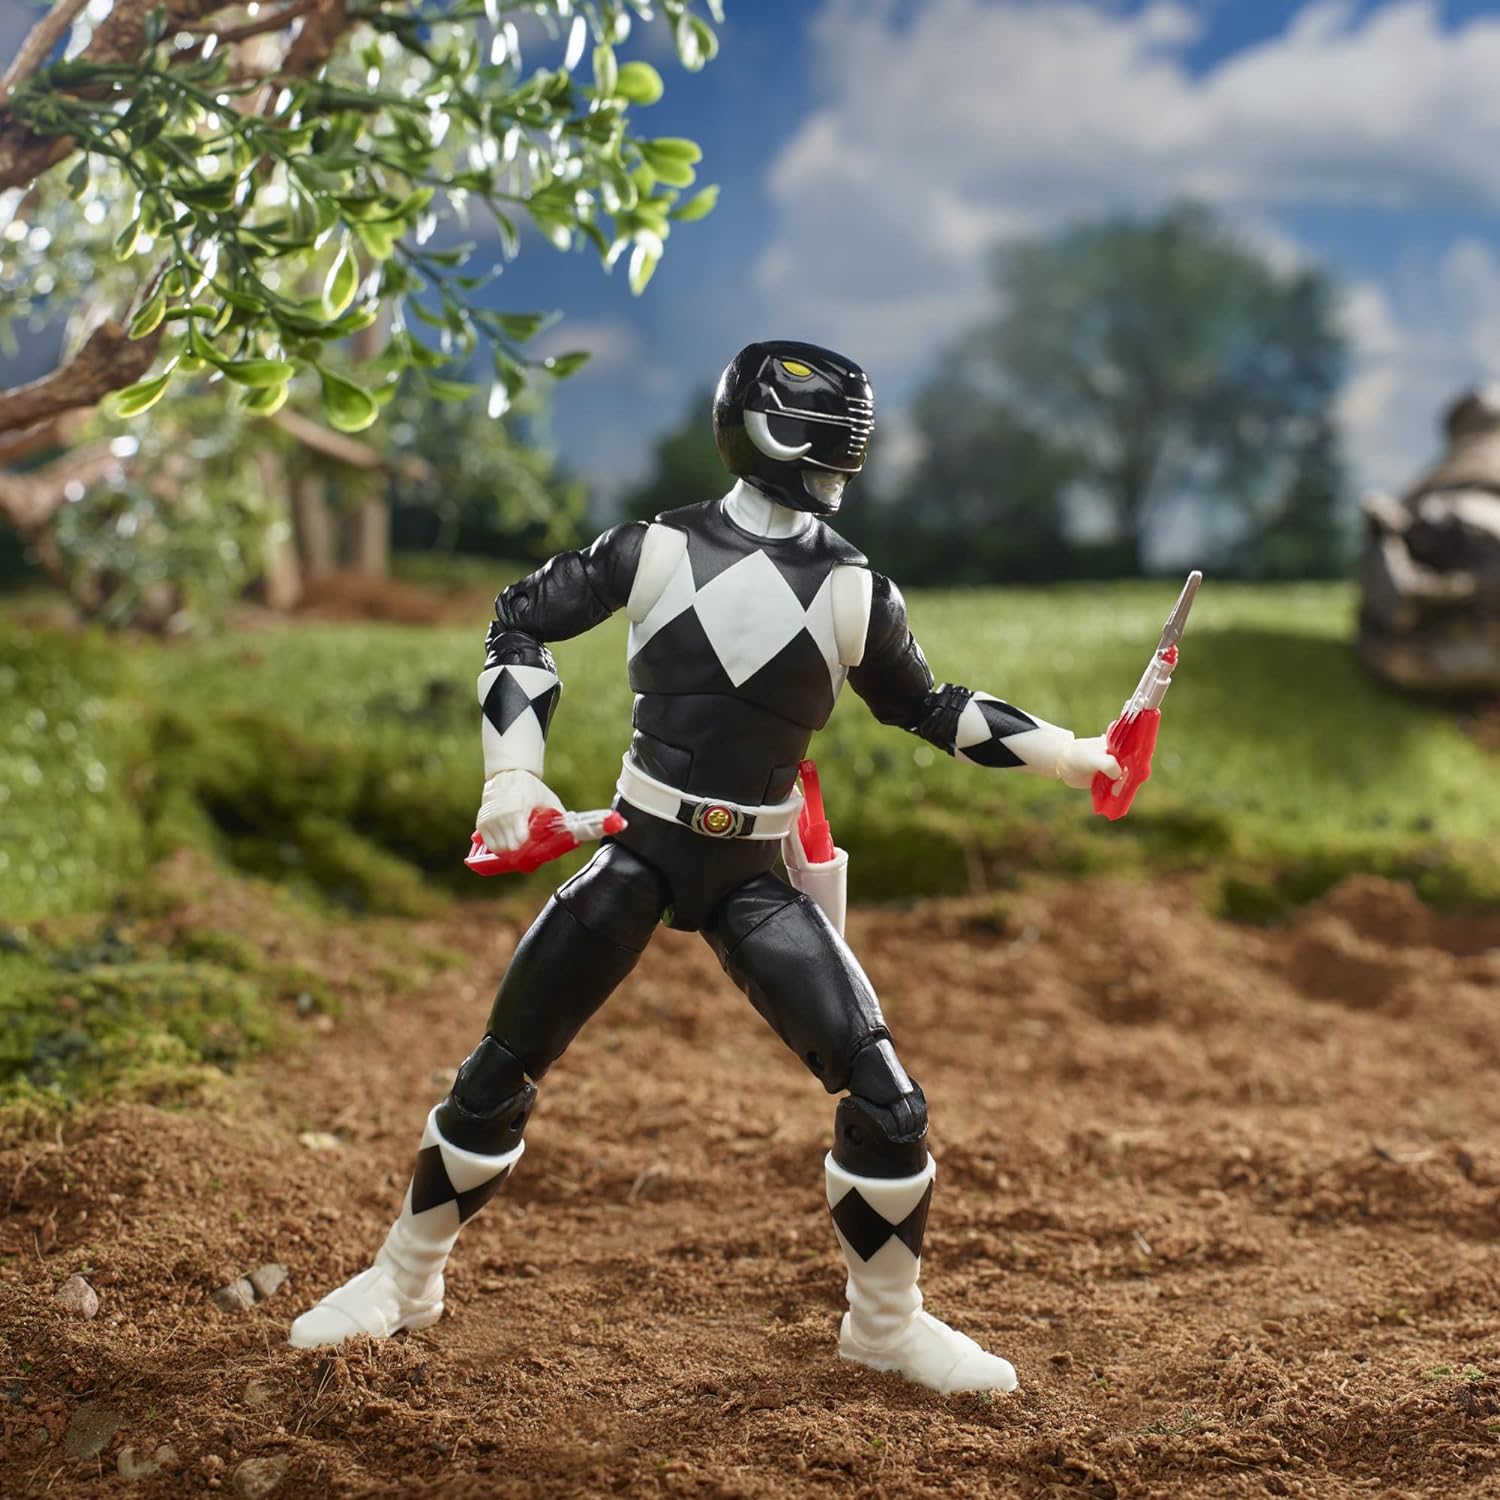 Power Rangers Lightning Collection Mighty Morphin Black Ranger 6-Inch Premium Collectible Action Figure Toy with Accessories